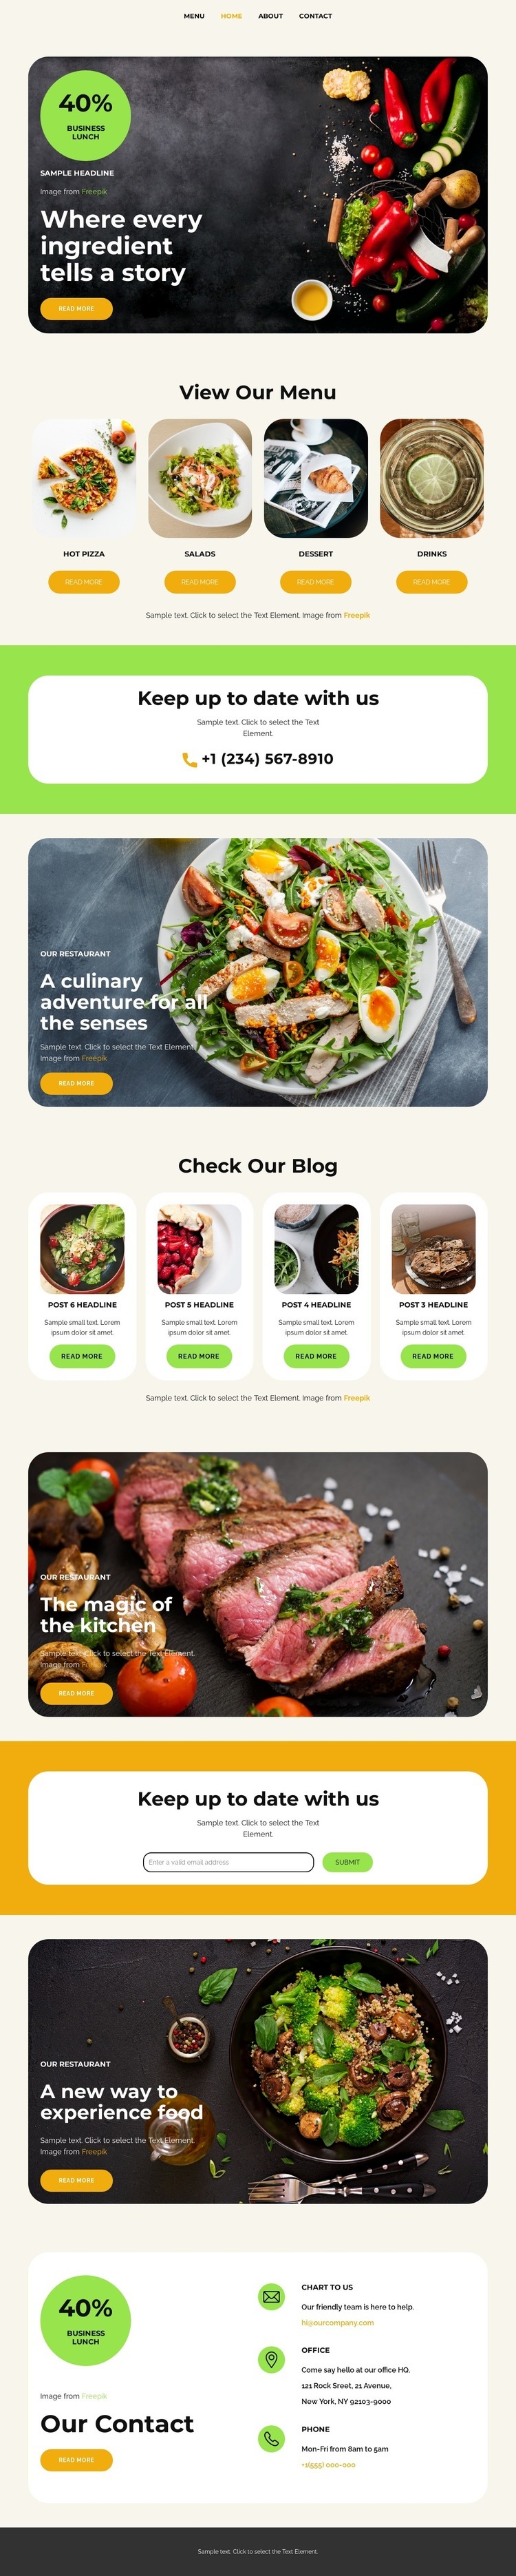 The magic of the kitchen Homepage Design